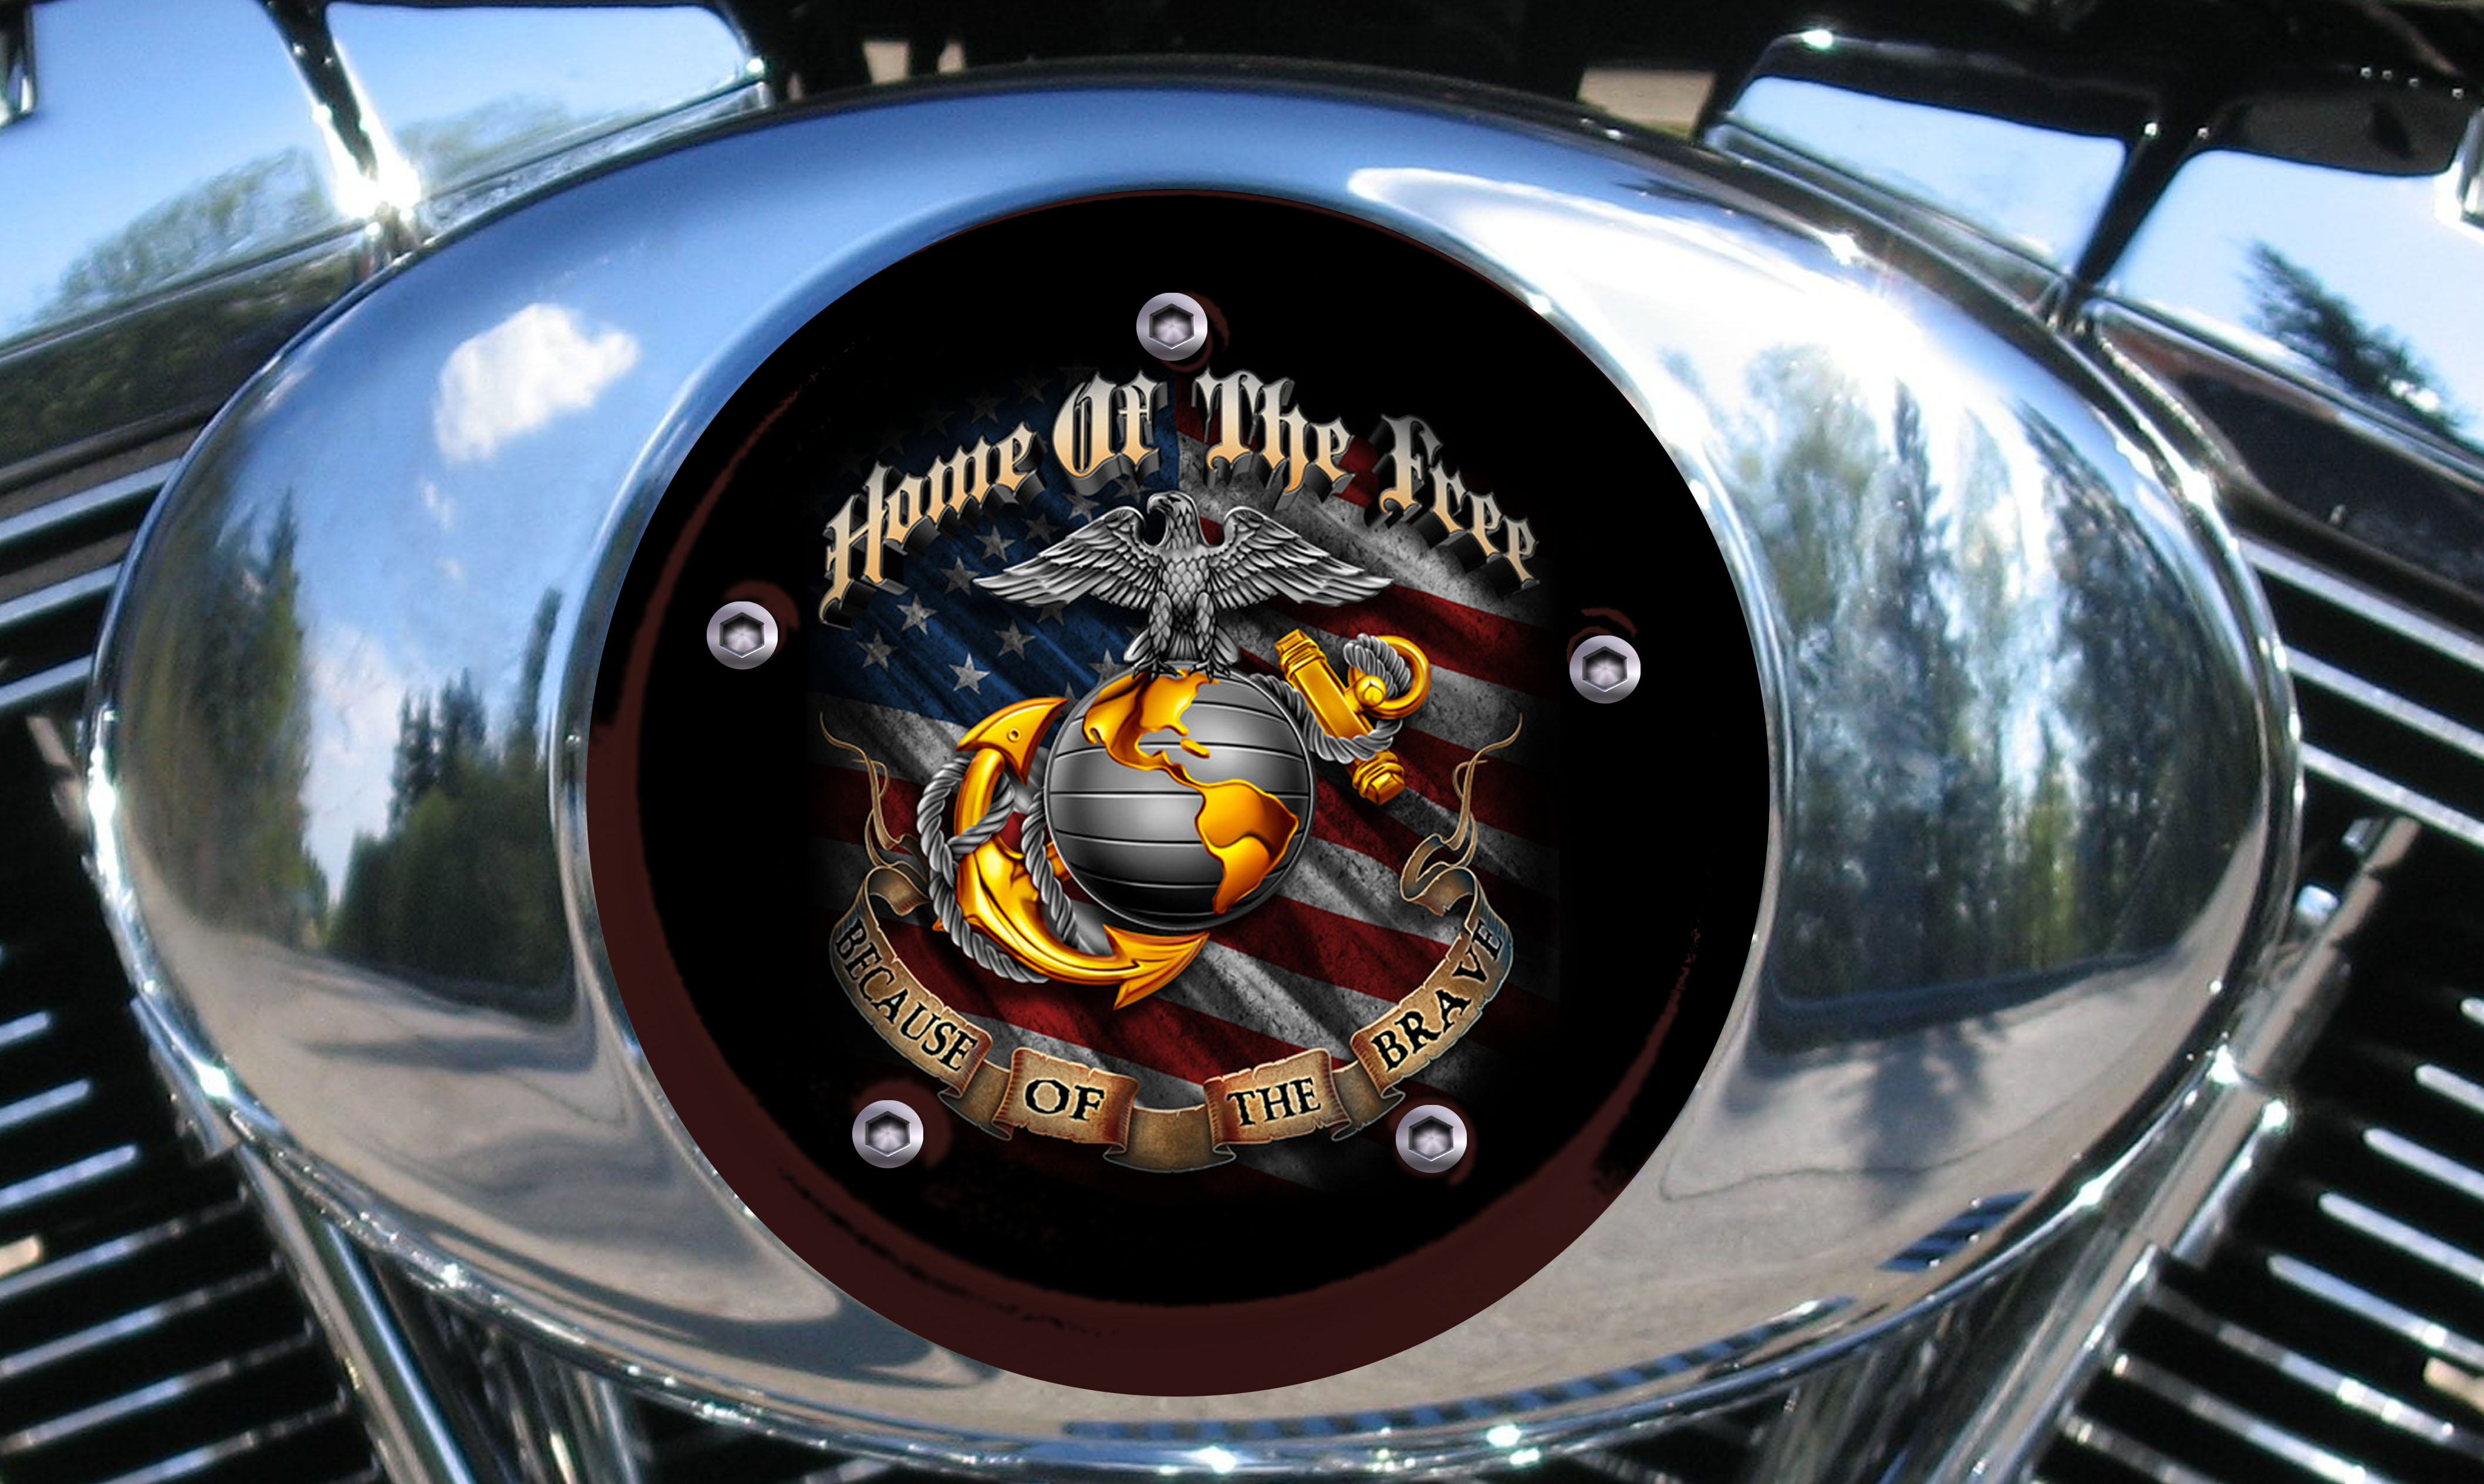 Harley Air Cleaner Cover - Marines Home Of The Free